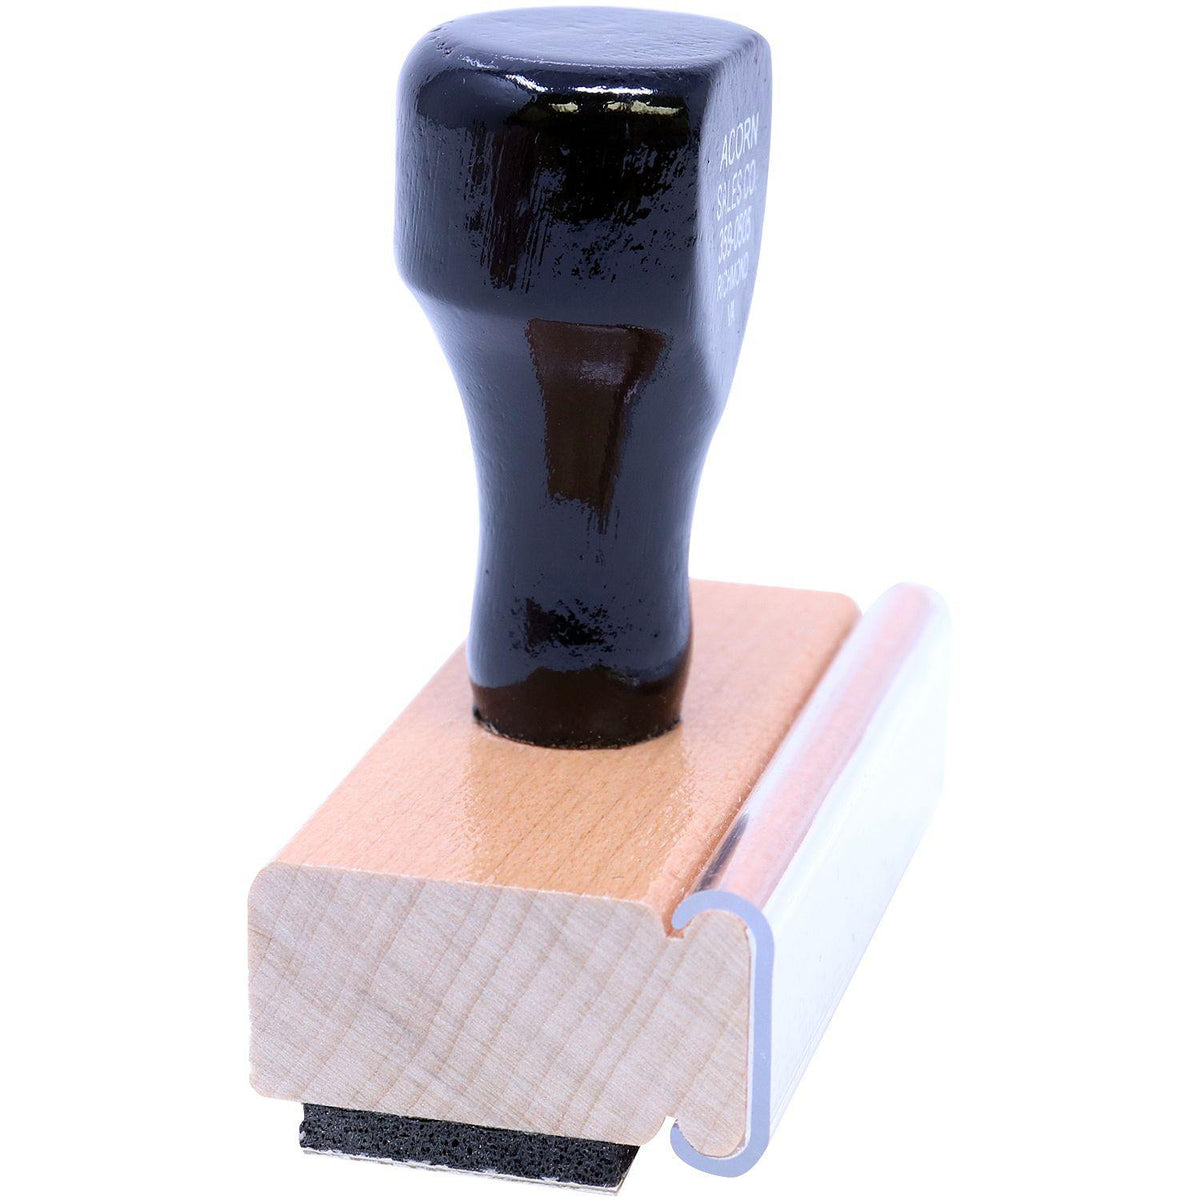 Side View of Large PAL Rubber Stamp at an Angle